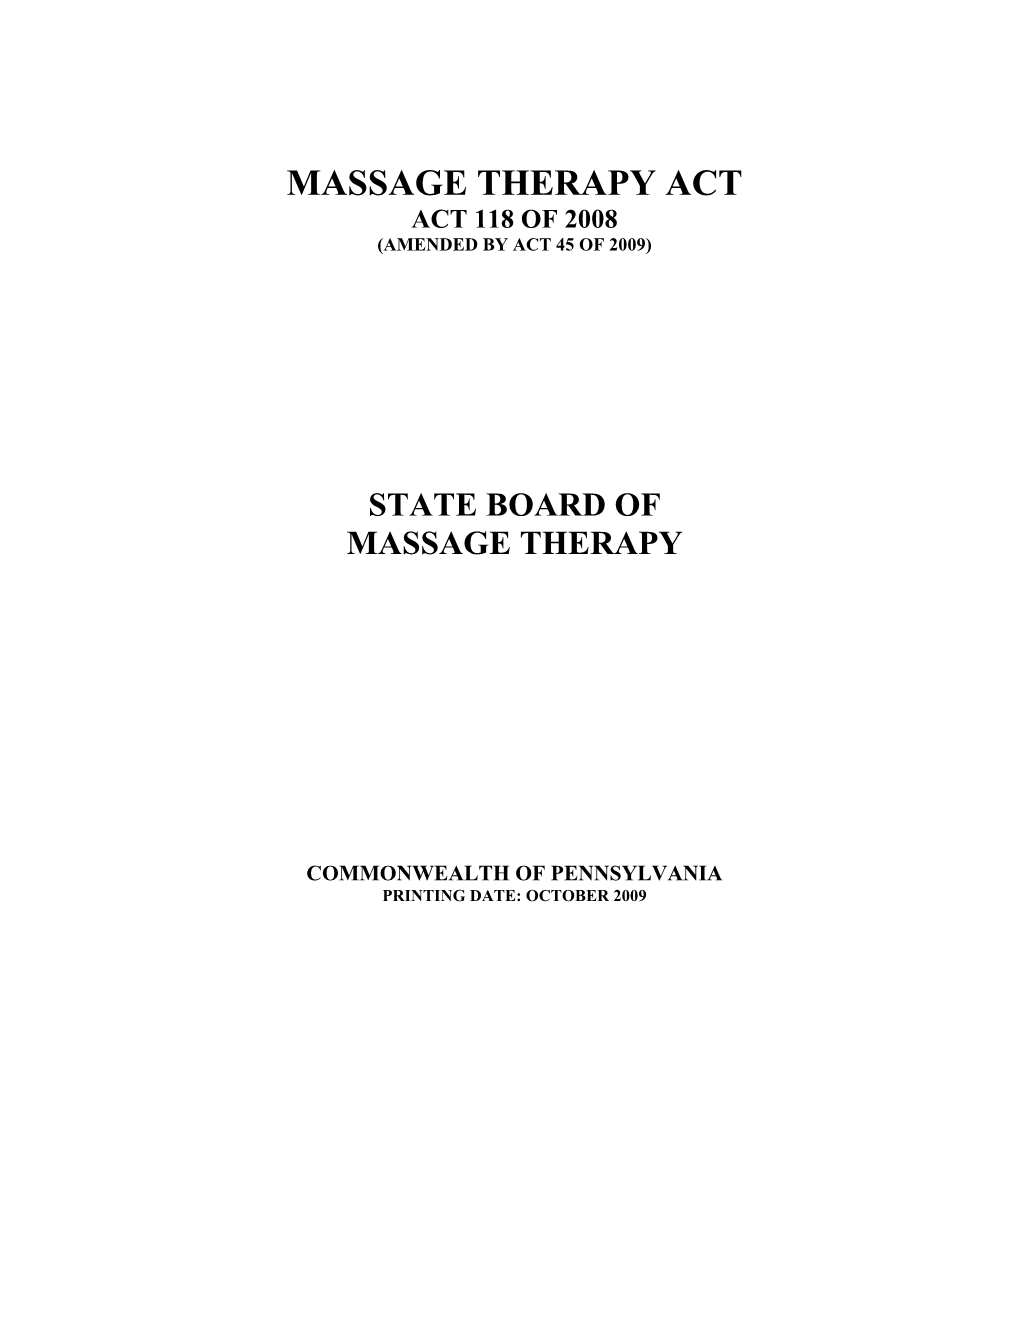 Massage Therapy Act Act 118 of 2008 (Amended by Act 45 of 2009)